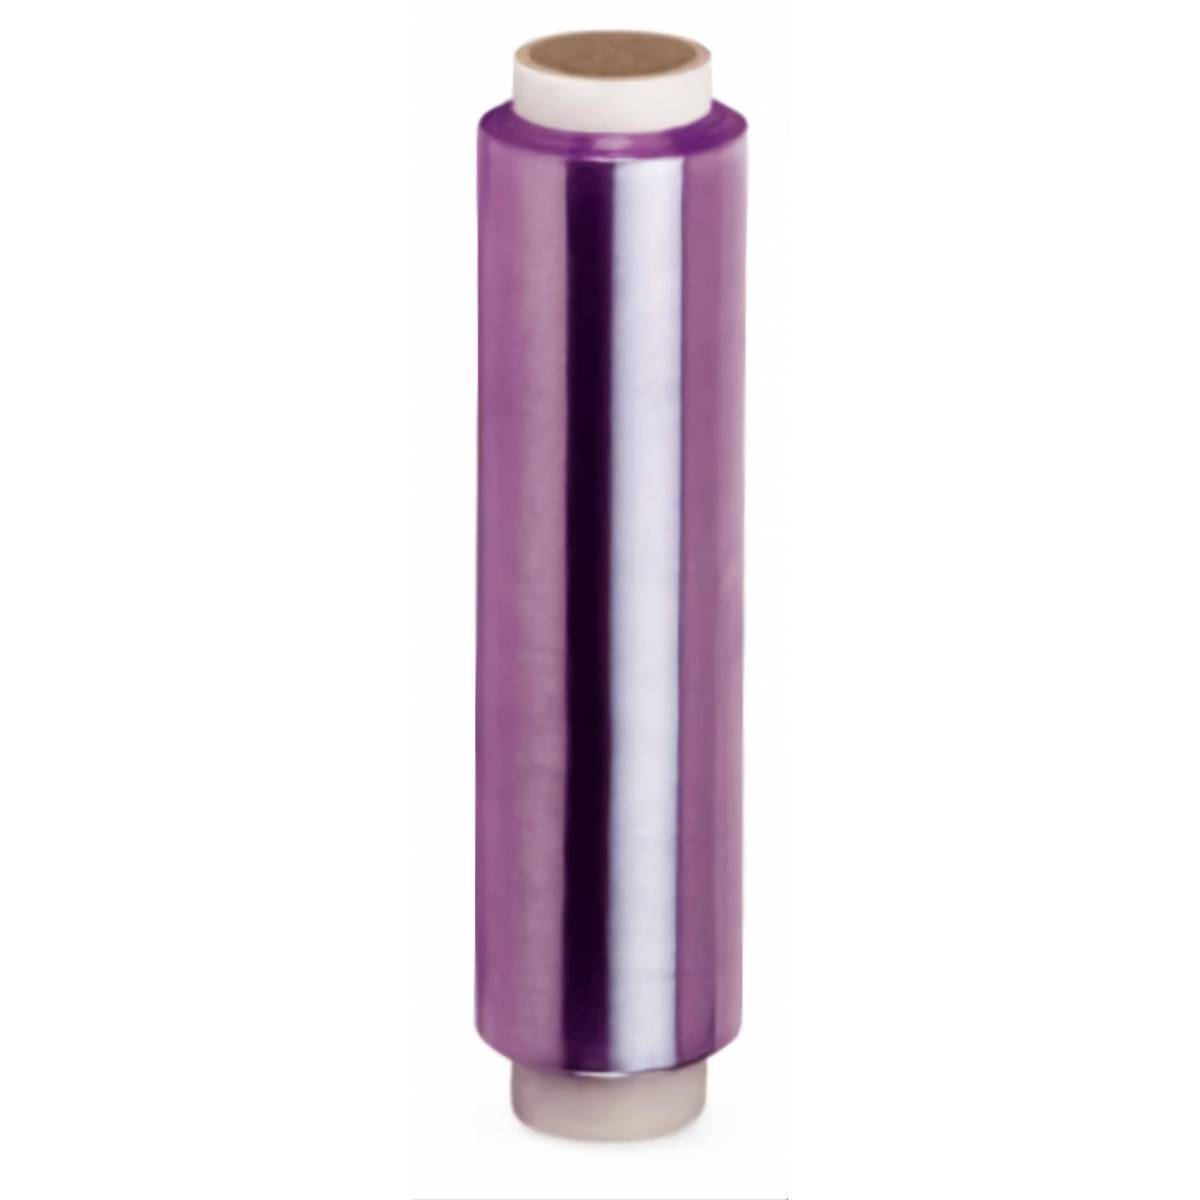 Roll of transparent stretch film for food